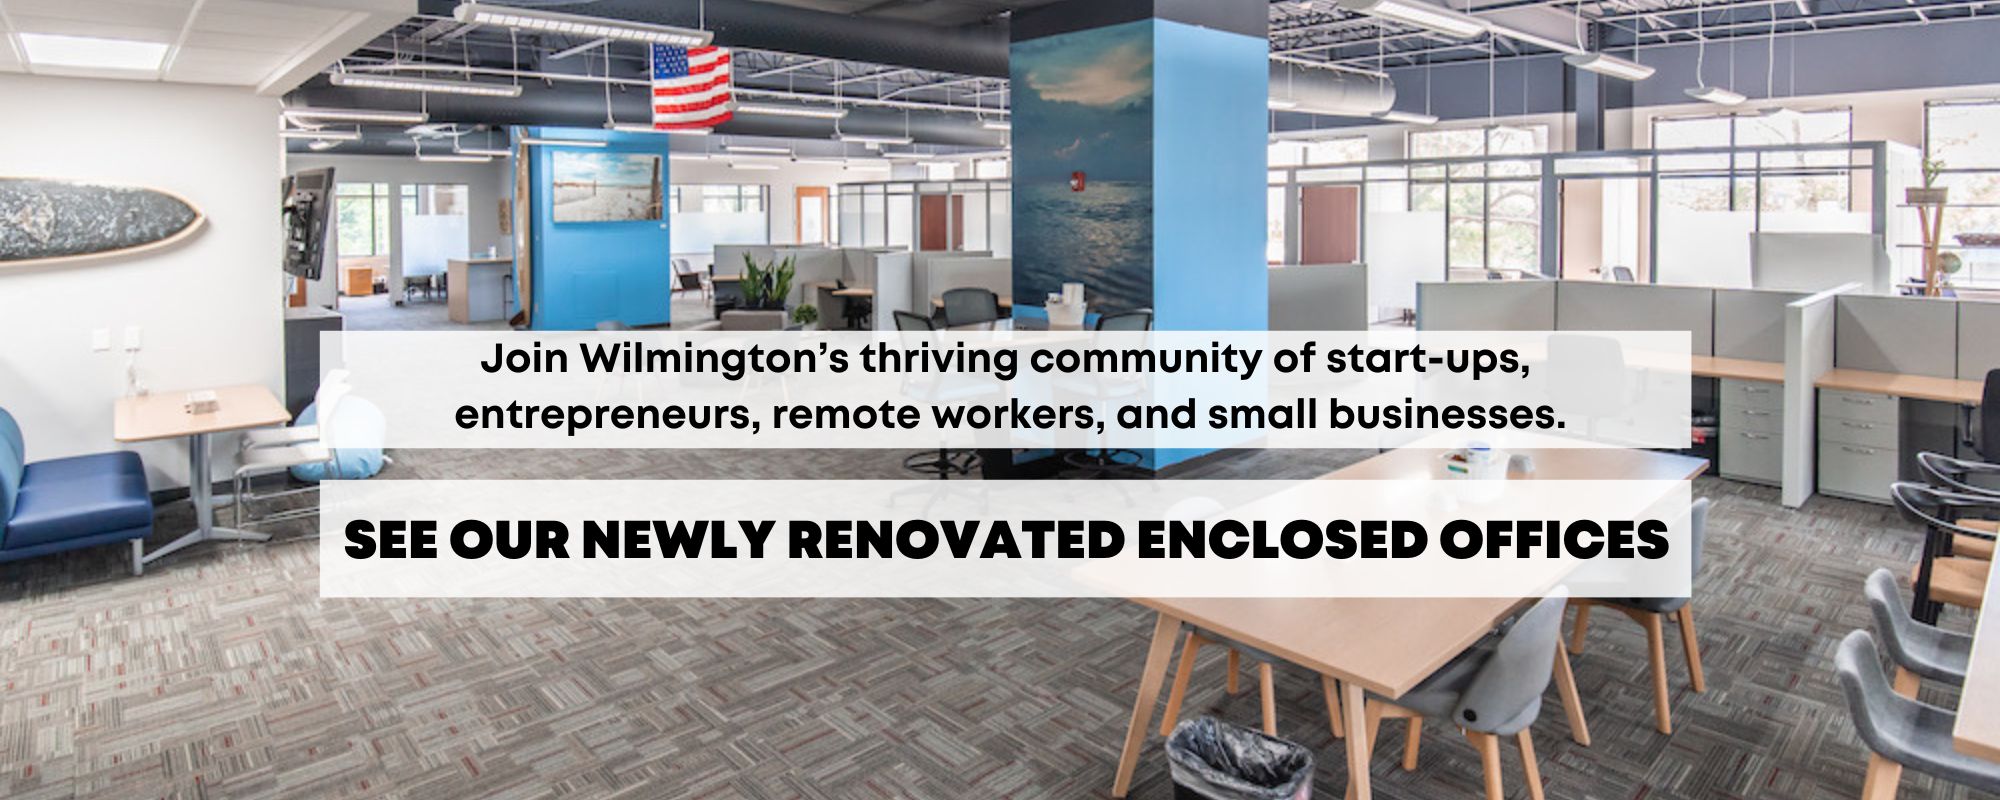 office-space-wilmington-nc